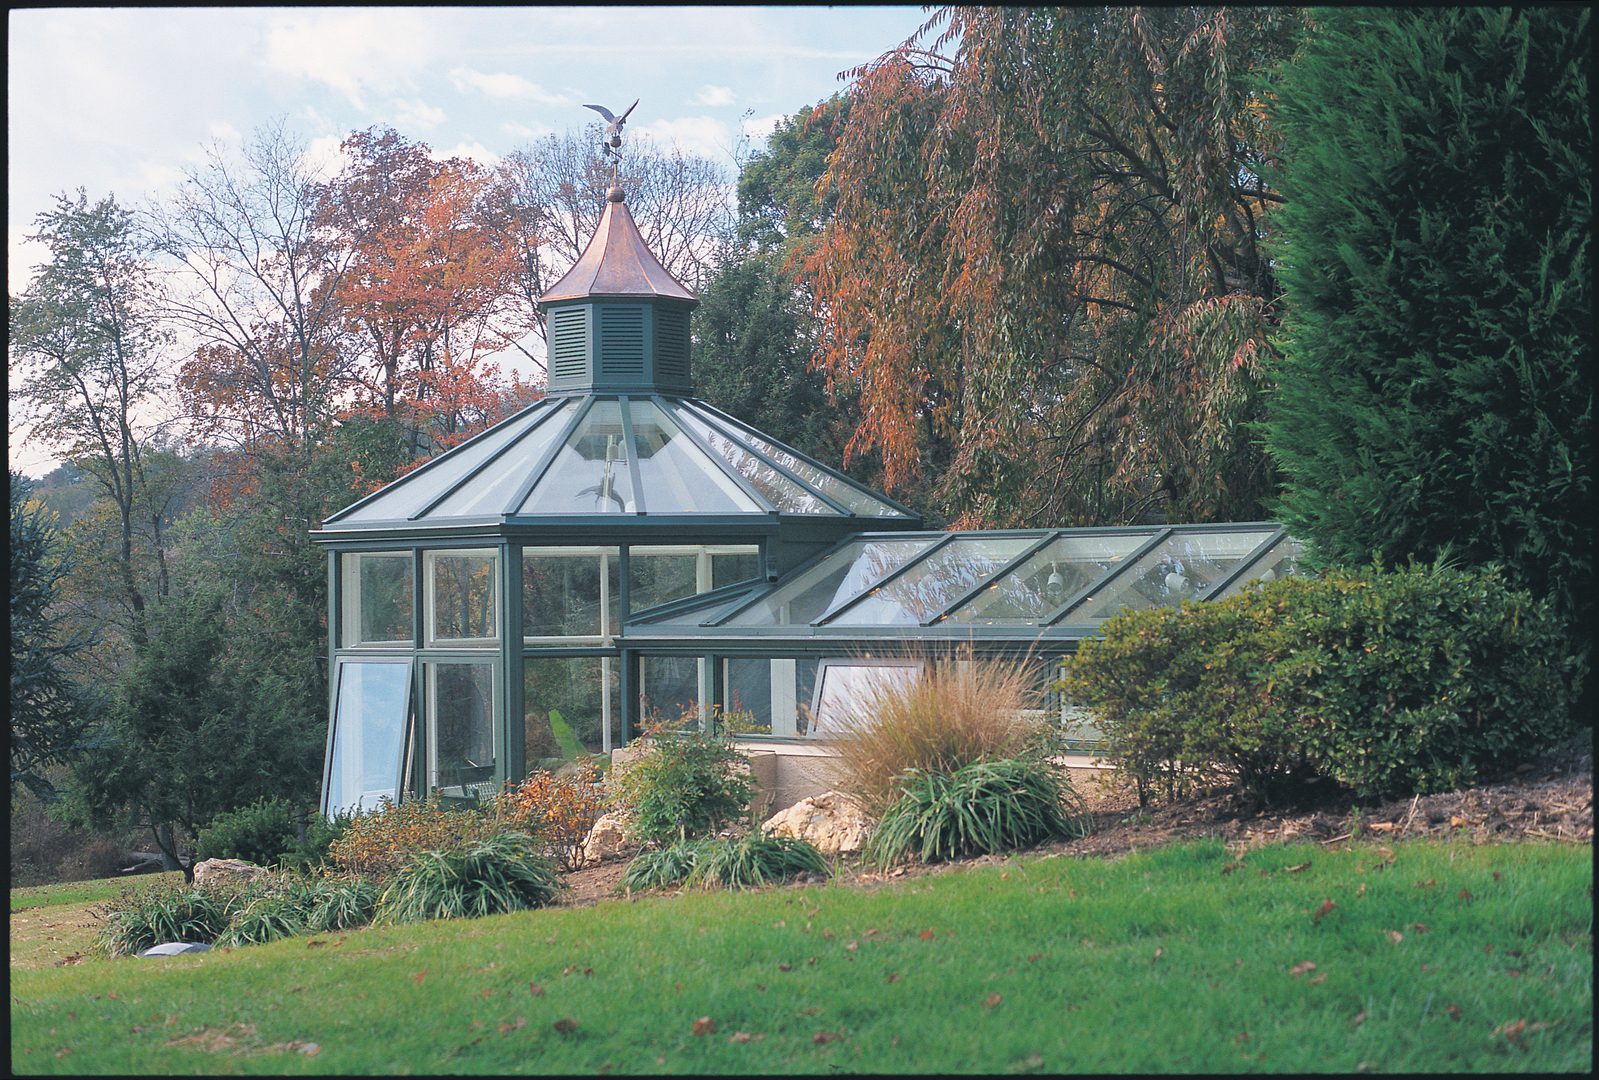 A large greenhouse with a metal roof and glass windows.